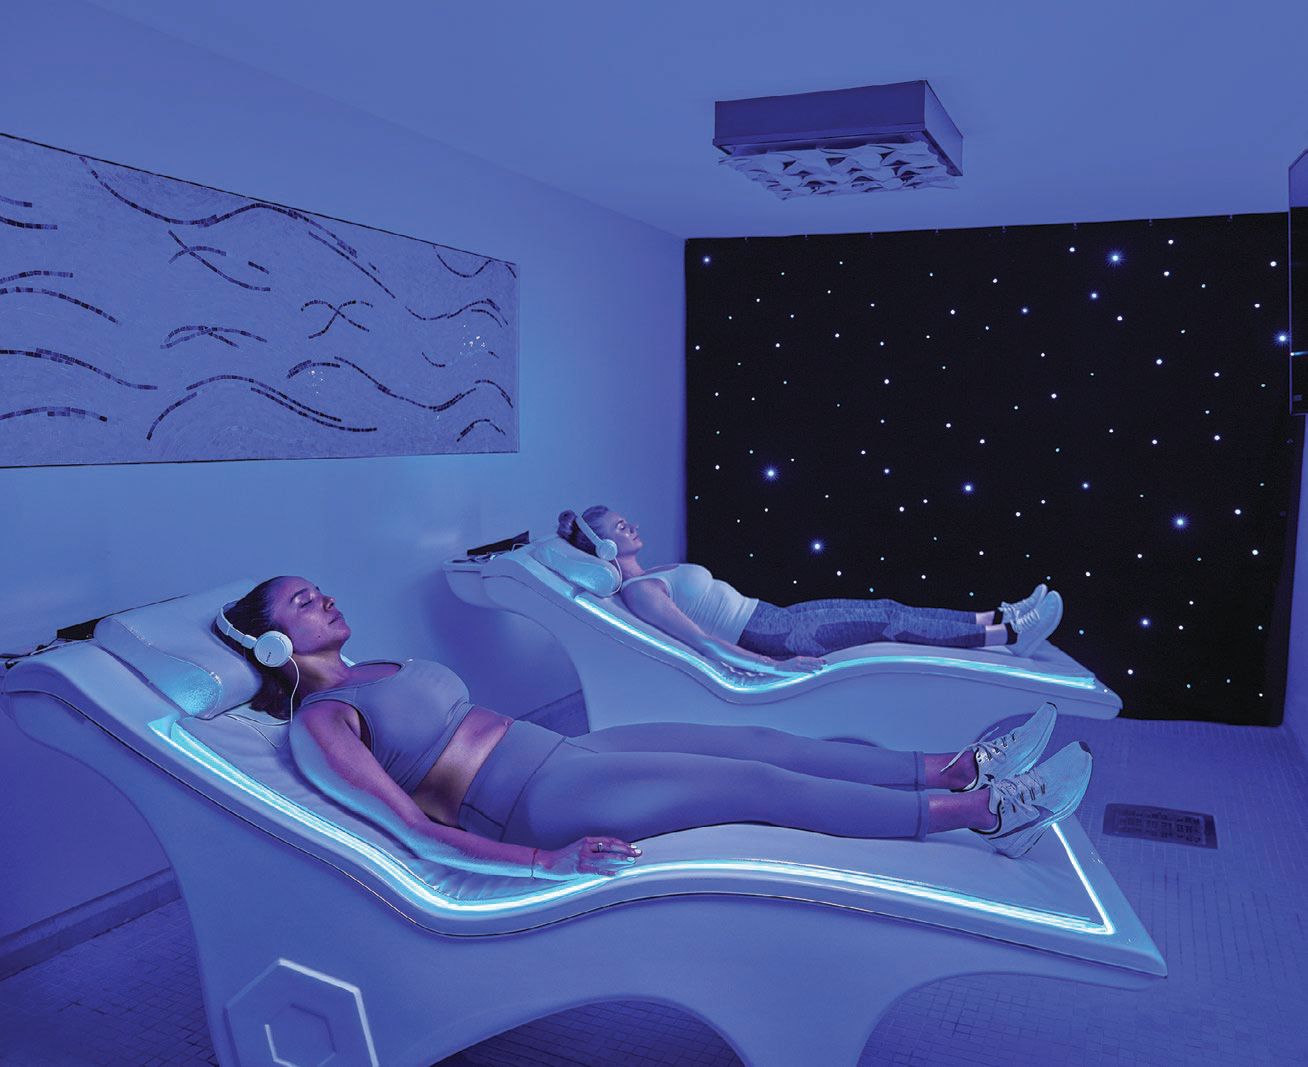 Guests experiencing VEMI (vibroacoustic electromagnetic therapy treatment) PHOTO COURTESY OF CARILLON MIAMI WELLNESS RESORT